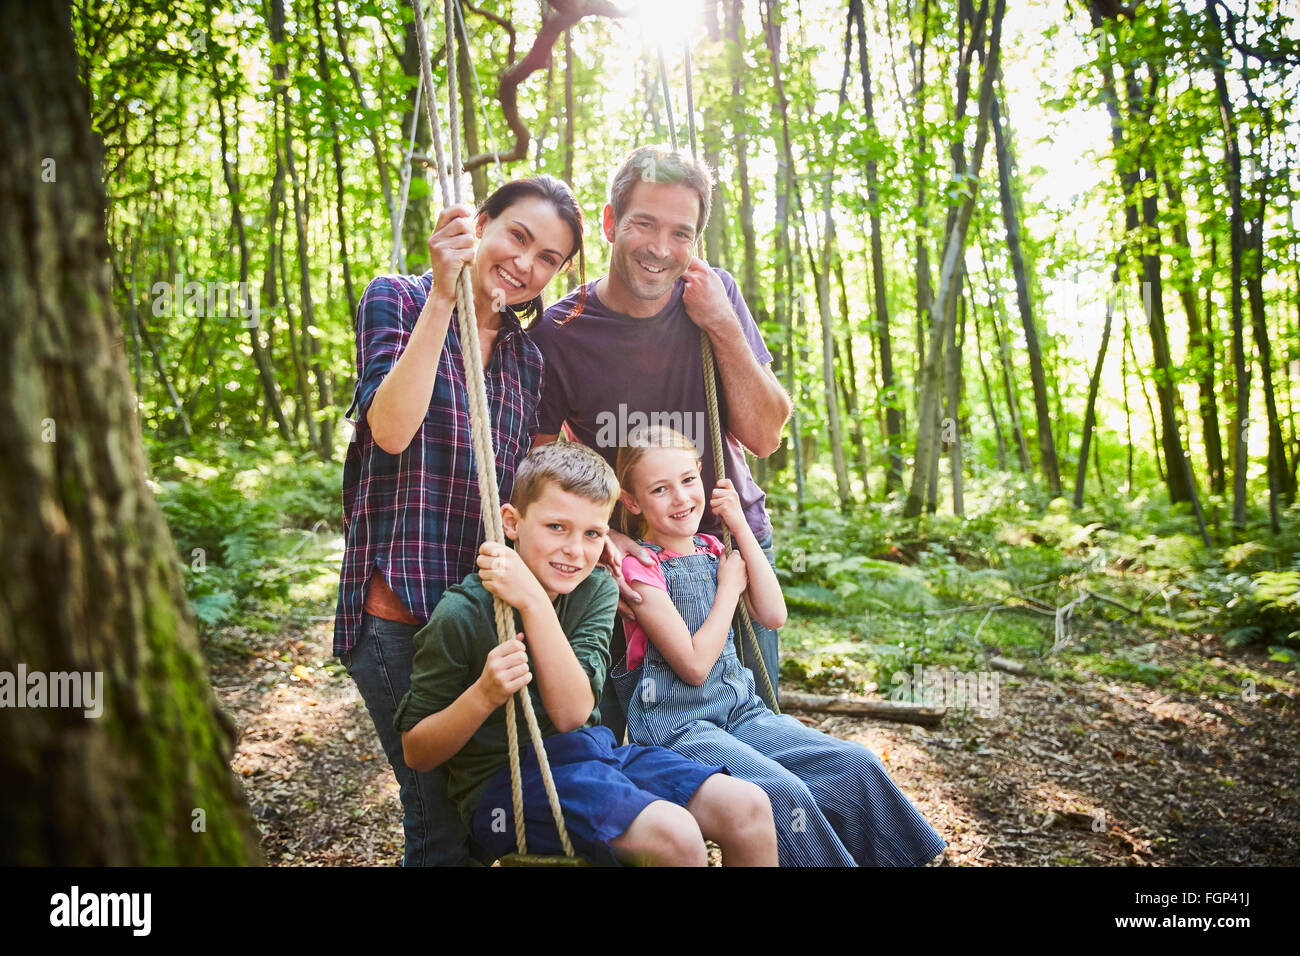 Portrait smiling family at rope swing in woods Stock Photo